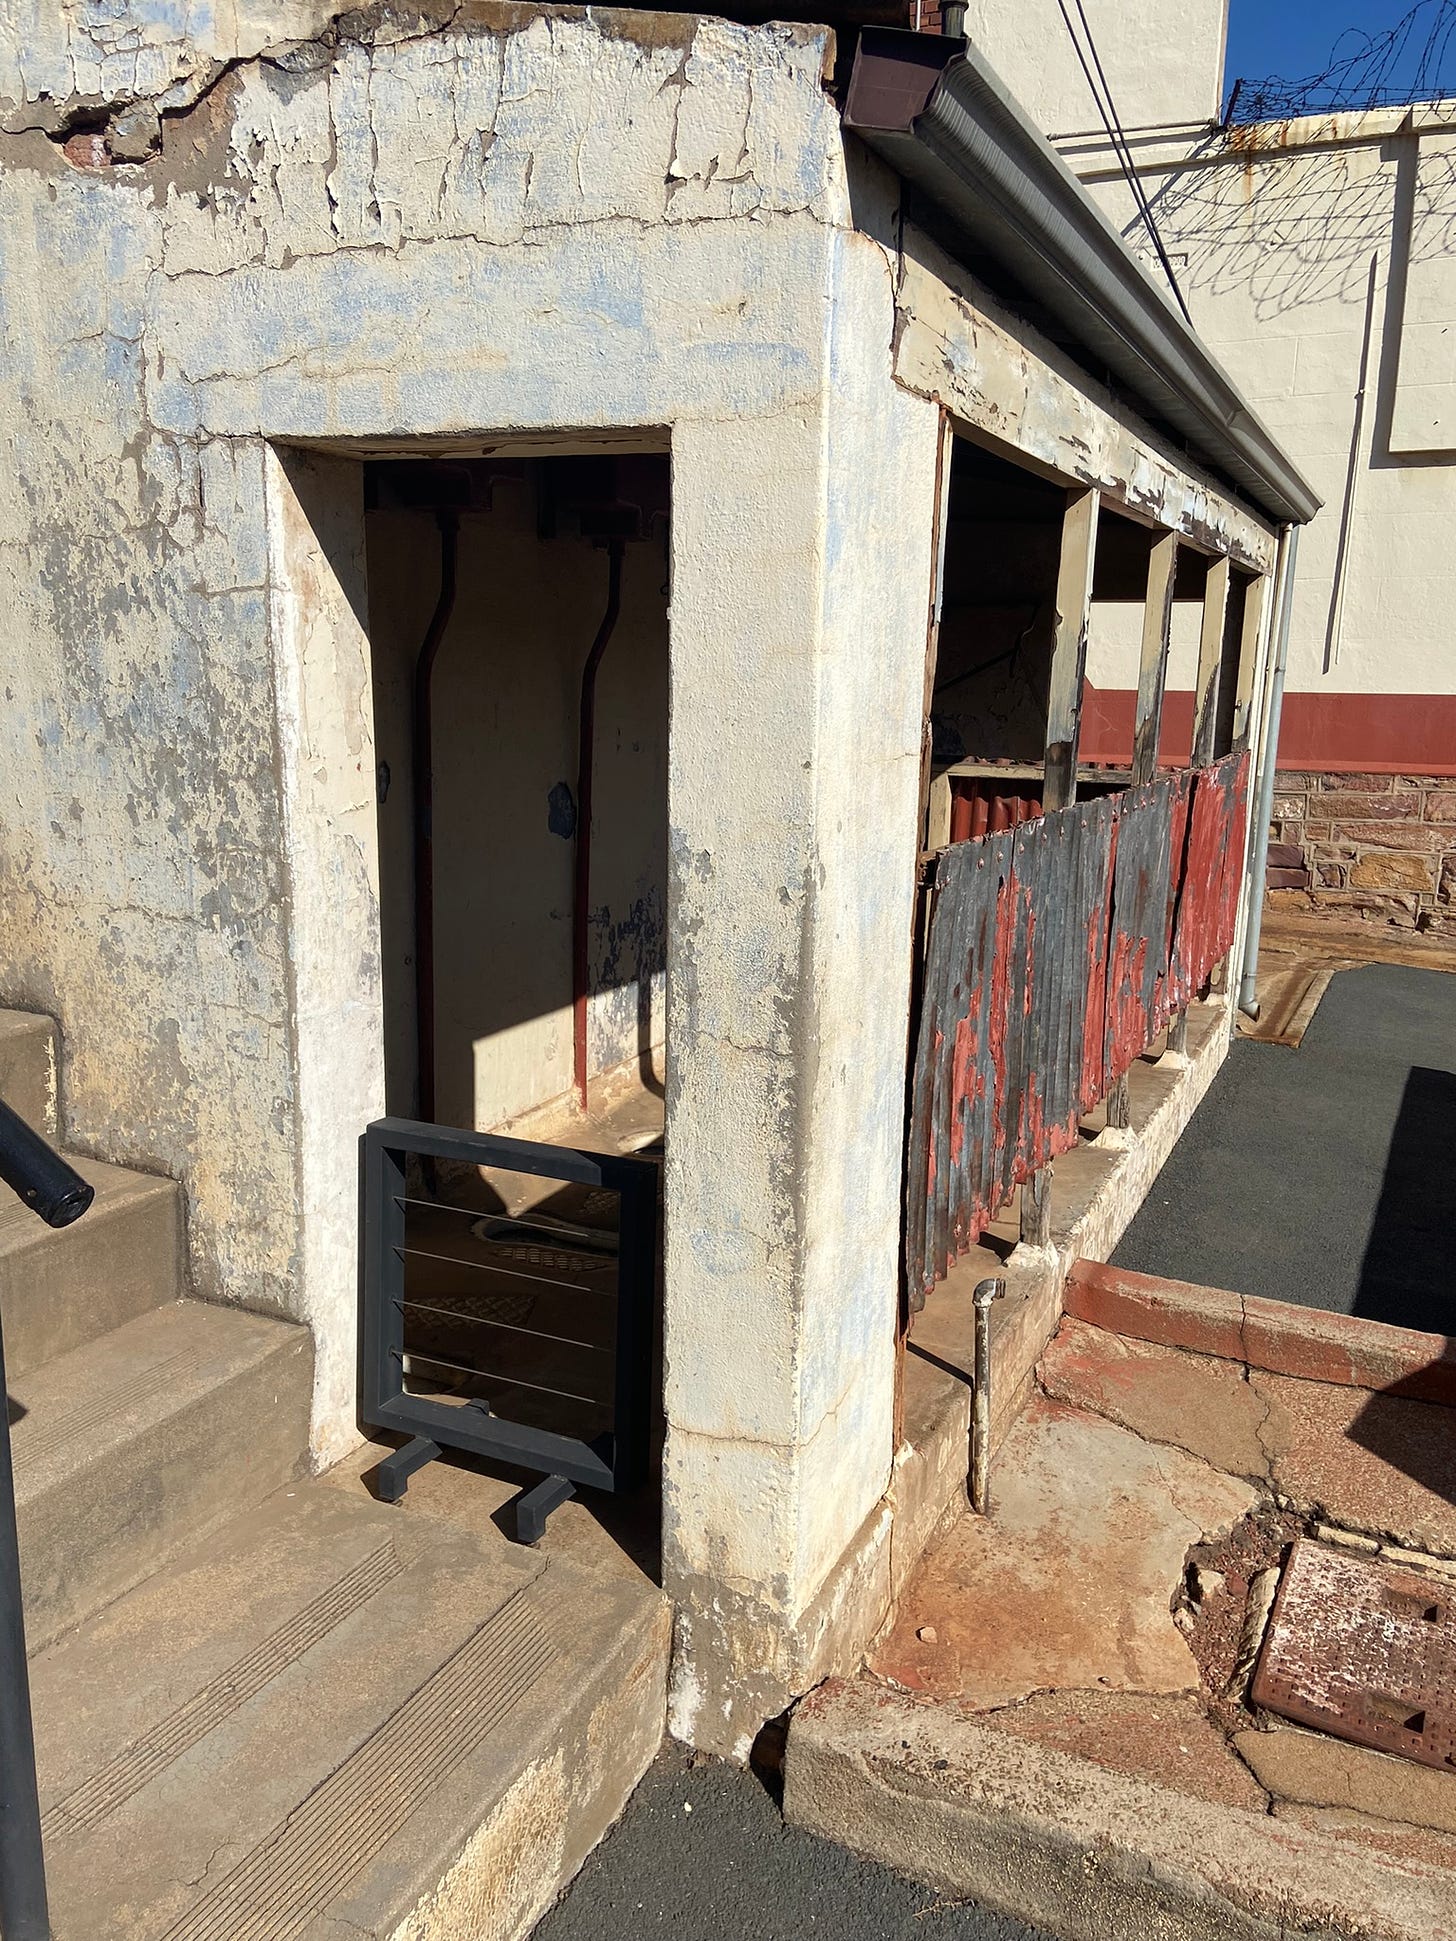 Number Four Prison Toilets. Constitution Hill. Johannesburg, South Africa. Author Photograph. July 2, 2022